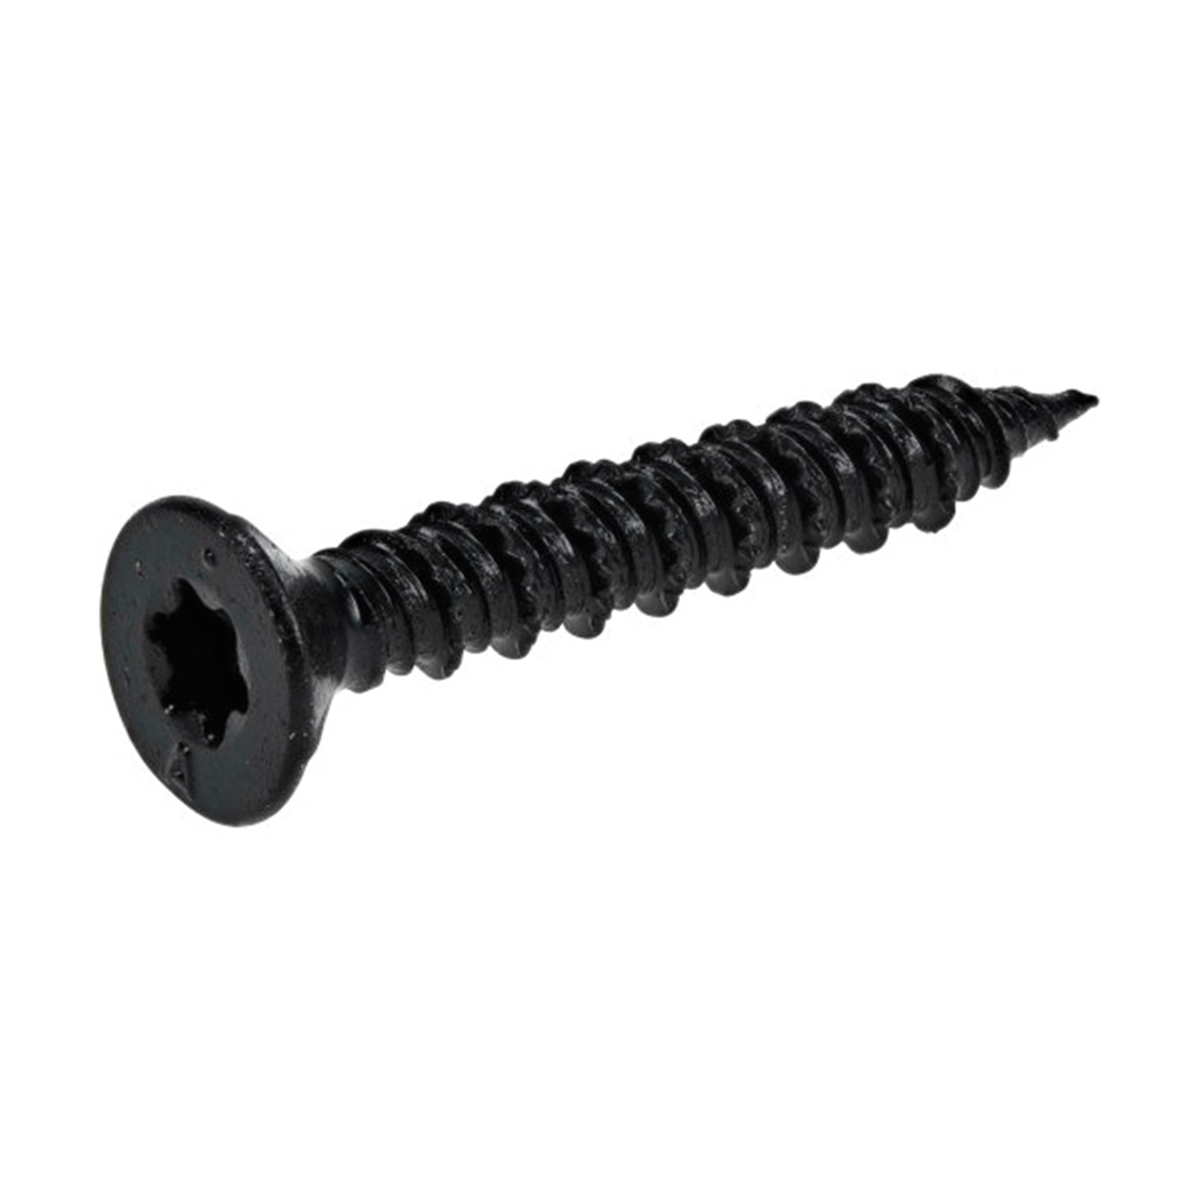 376606 Concrete Screw Anchor, 1/4 in Dia, 1-3/4 in L, Carbon Steel, Epoxy-Coated, 100/PK